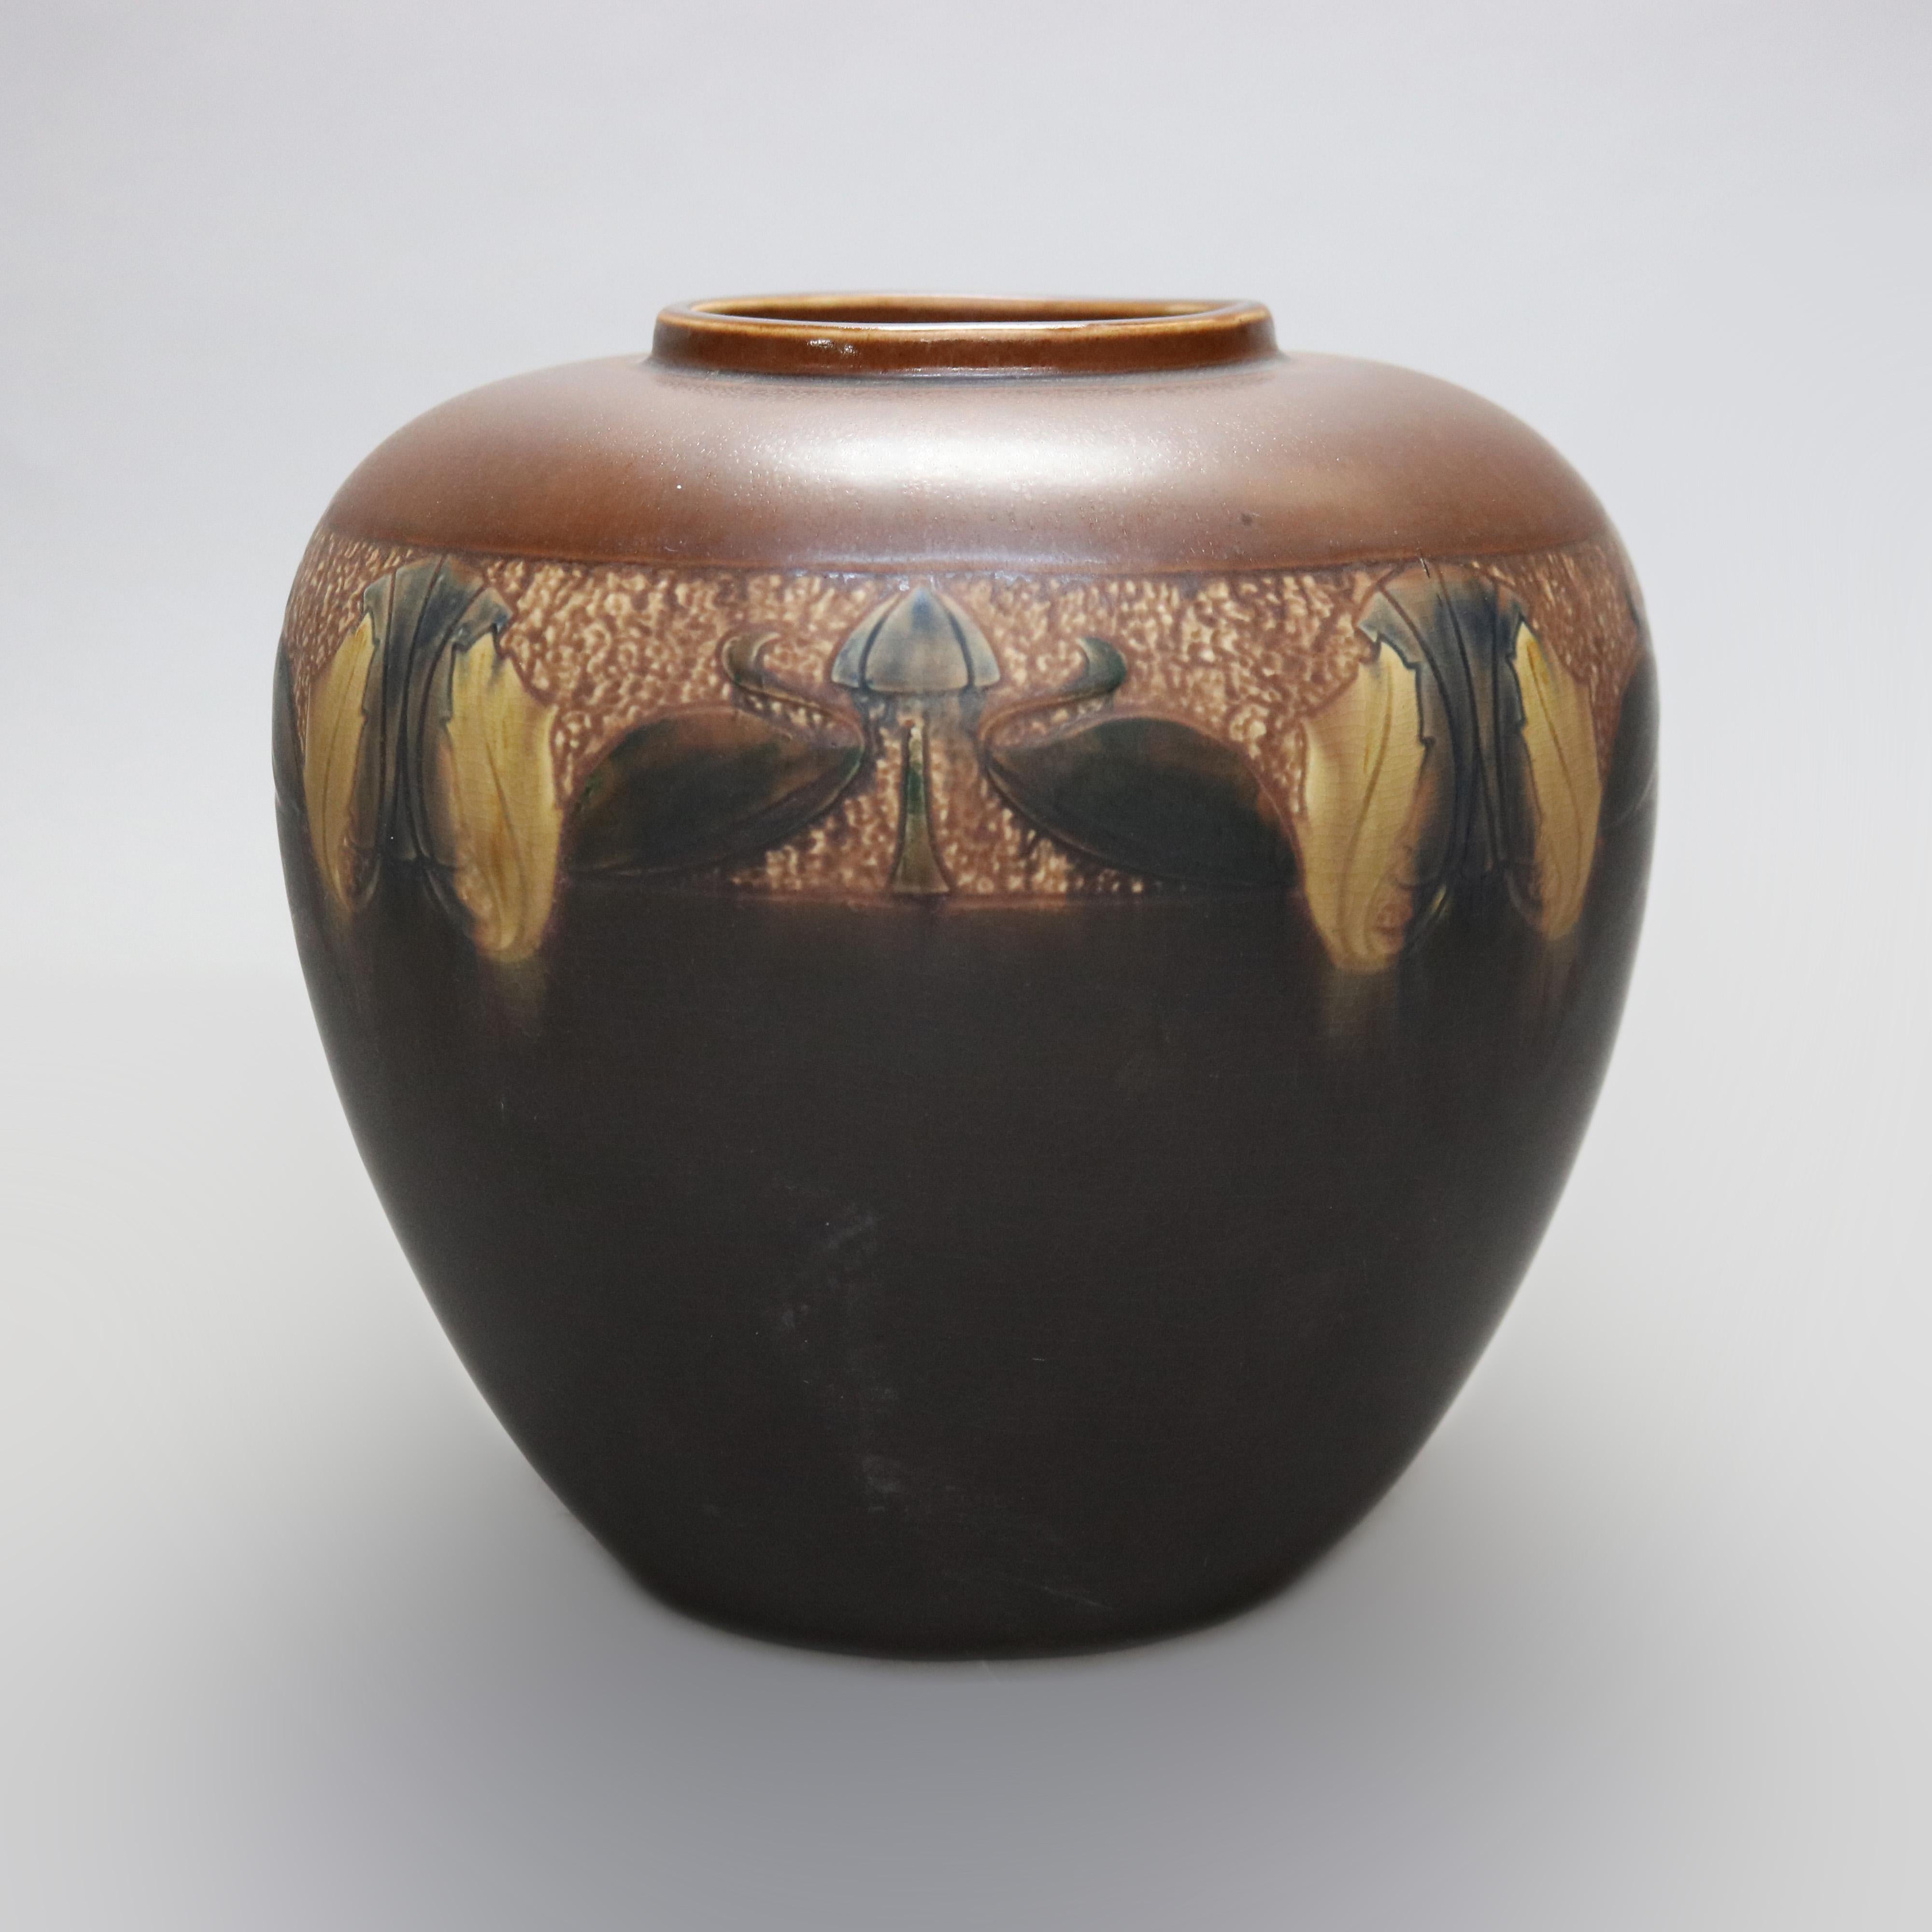 An antique Arts and Crafts vase attributed to Roseville Pottery offers art pottery construction having two tone glaze with stylized leaf and swan band, unsigned, c1910

Measures - 9.5''H x 9.5''W x 9.5''D.